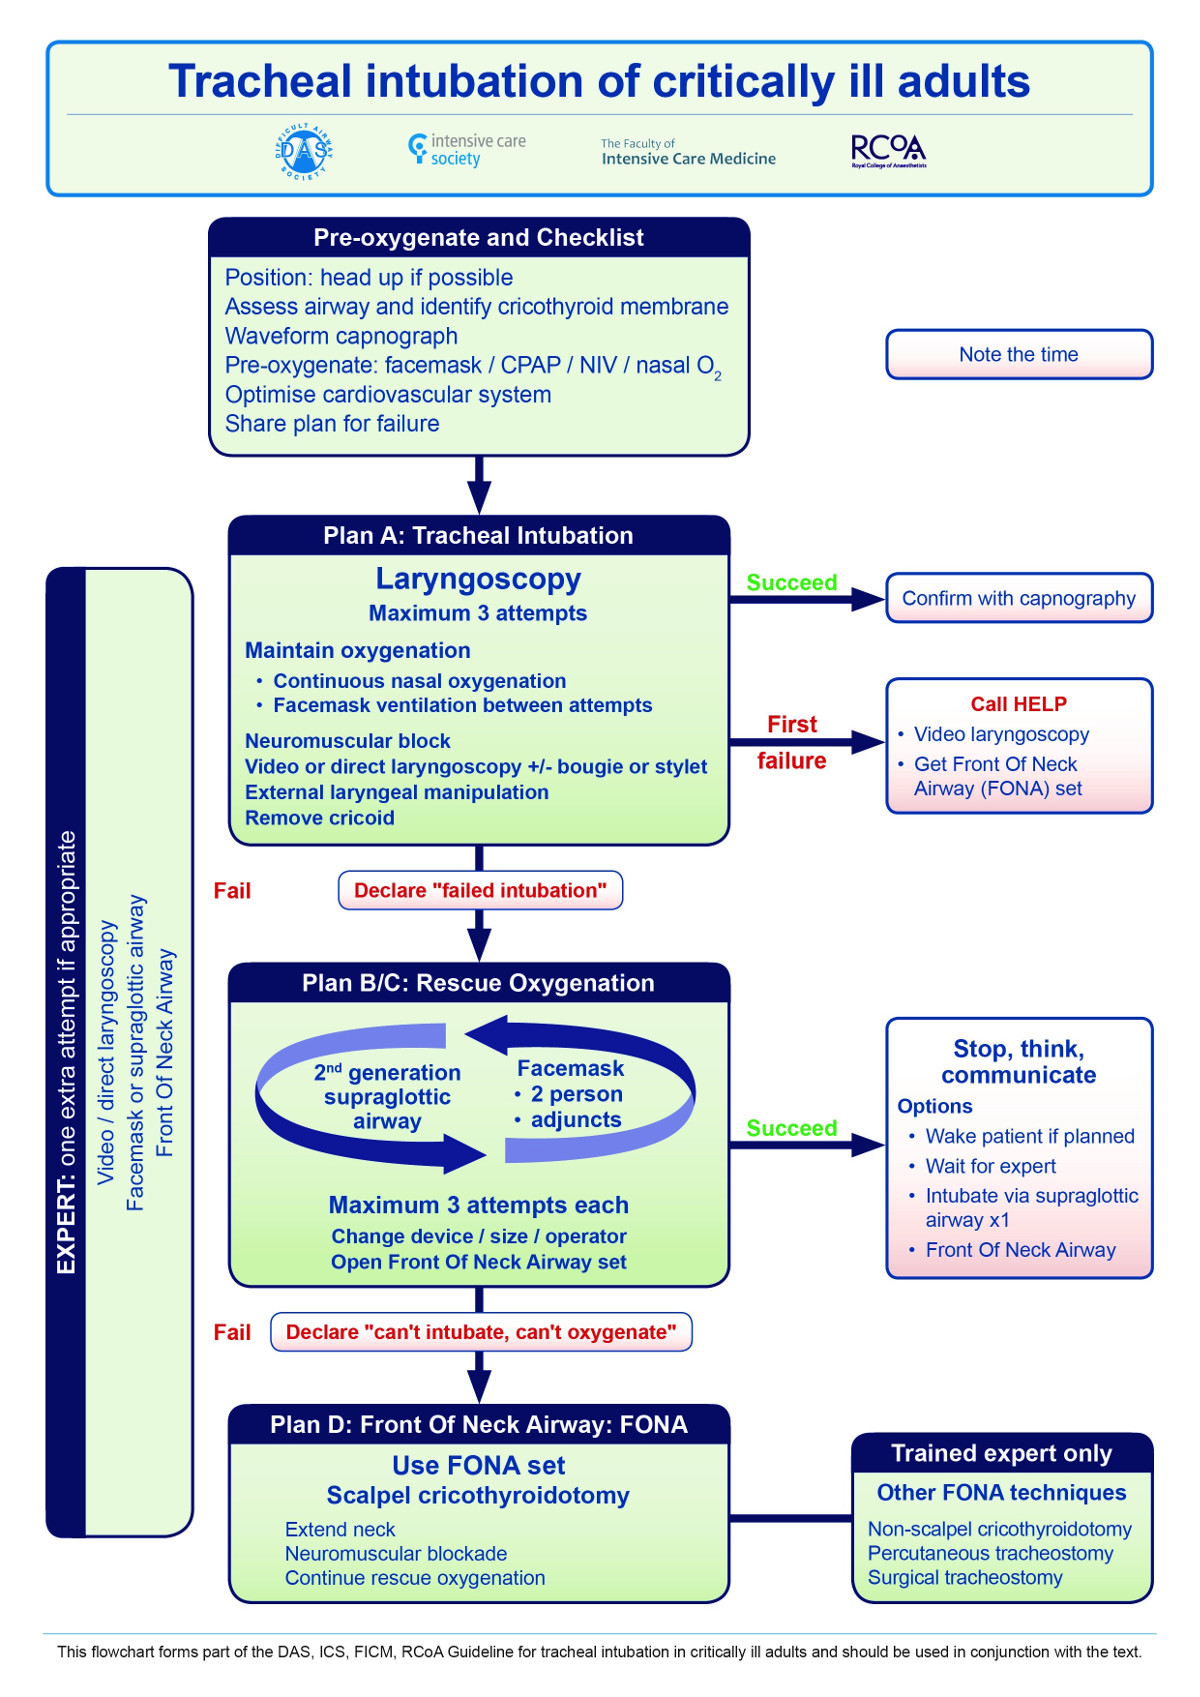 DAS guidelines for management of tracheal intubation in critically ill adults - Algorithm 1